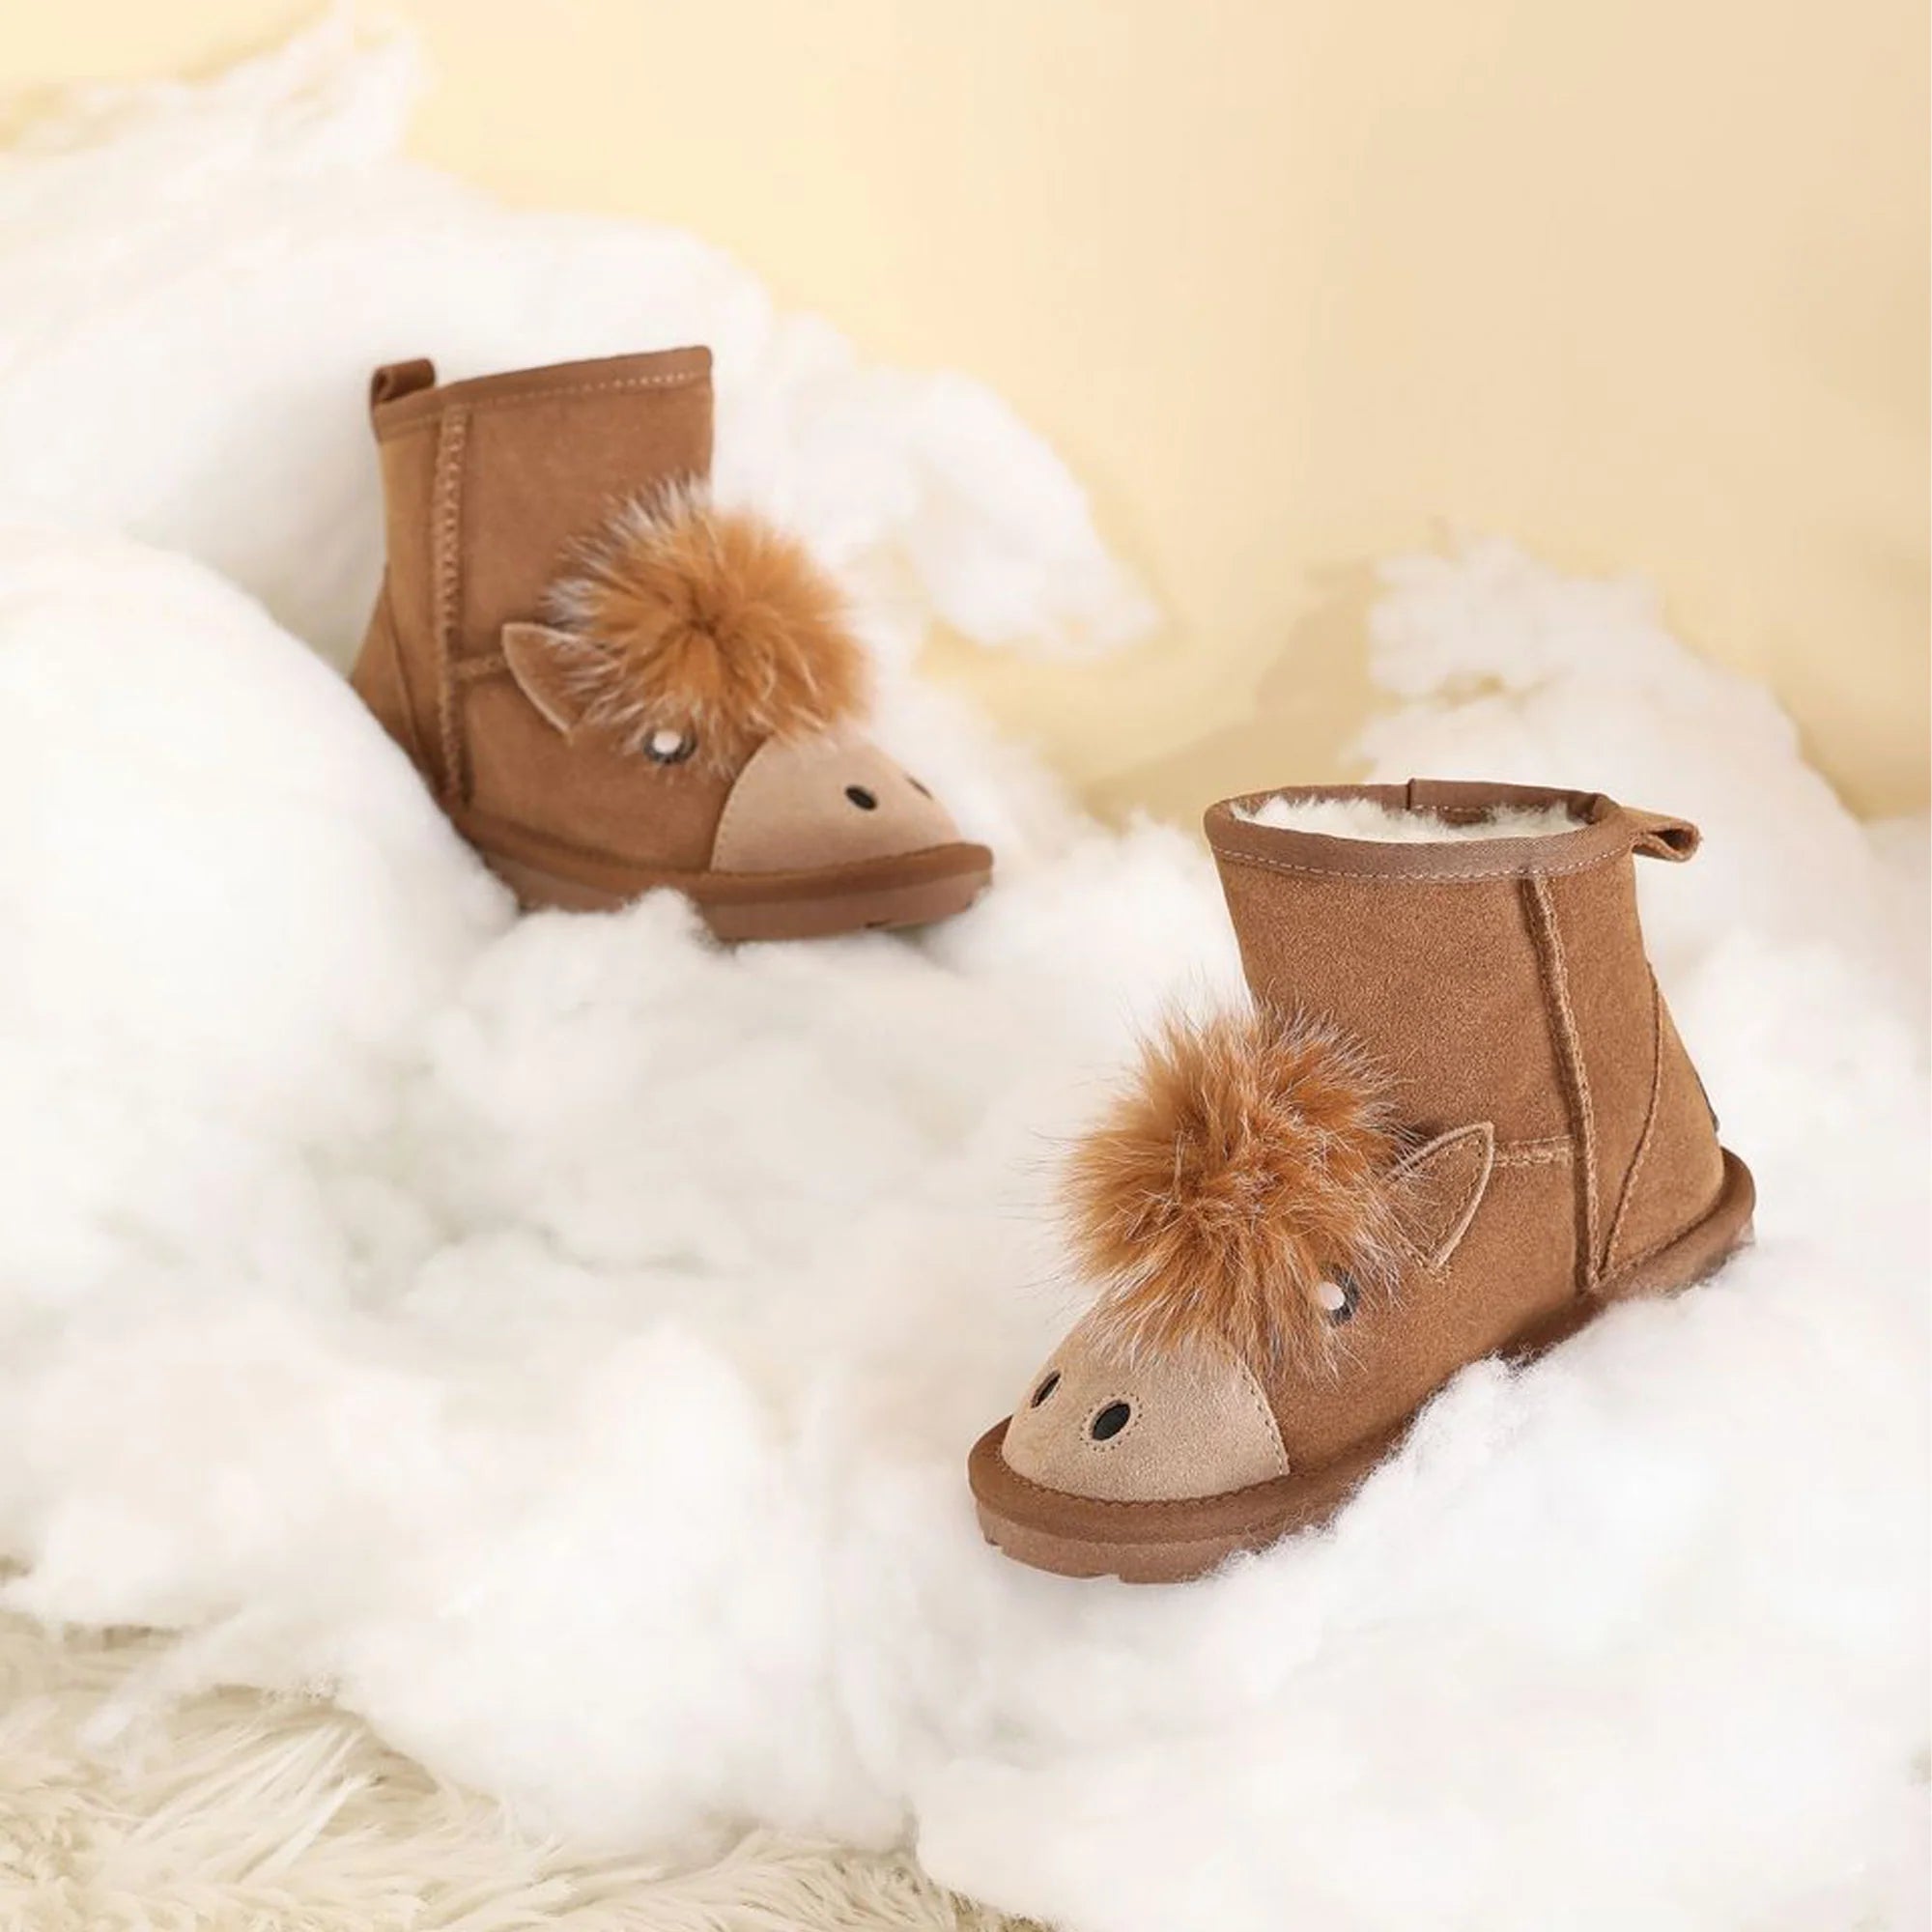 UGGs for Kids: Why They’re a Great Choice for Your Children